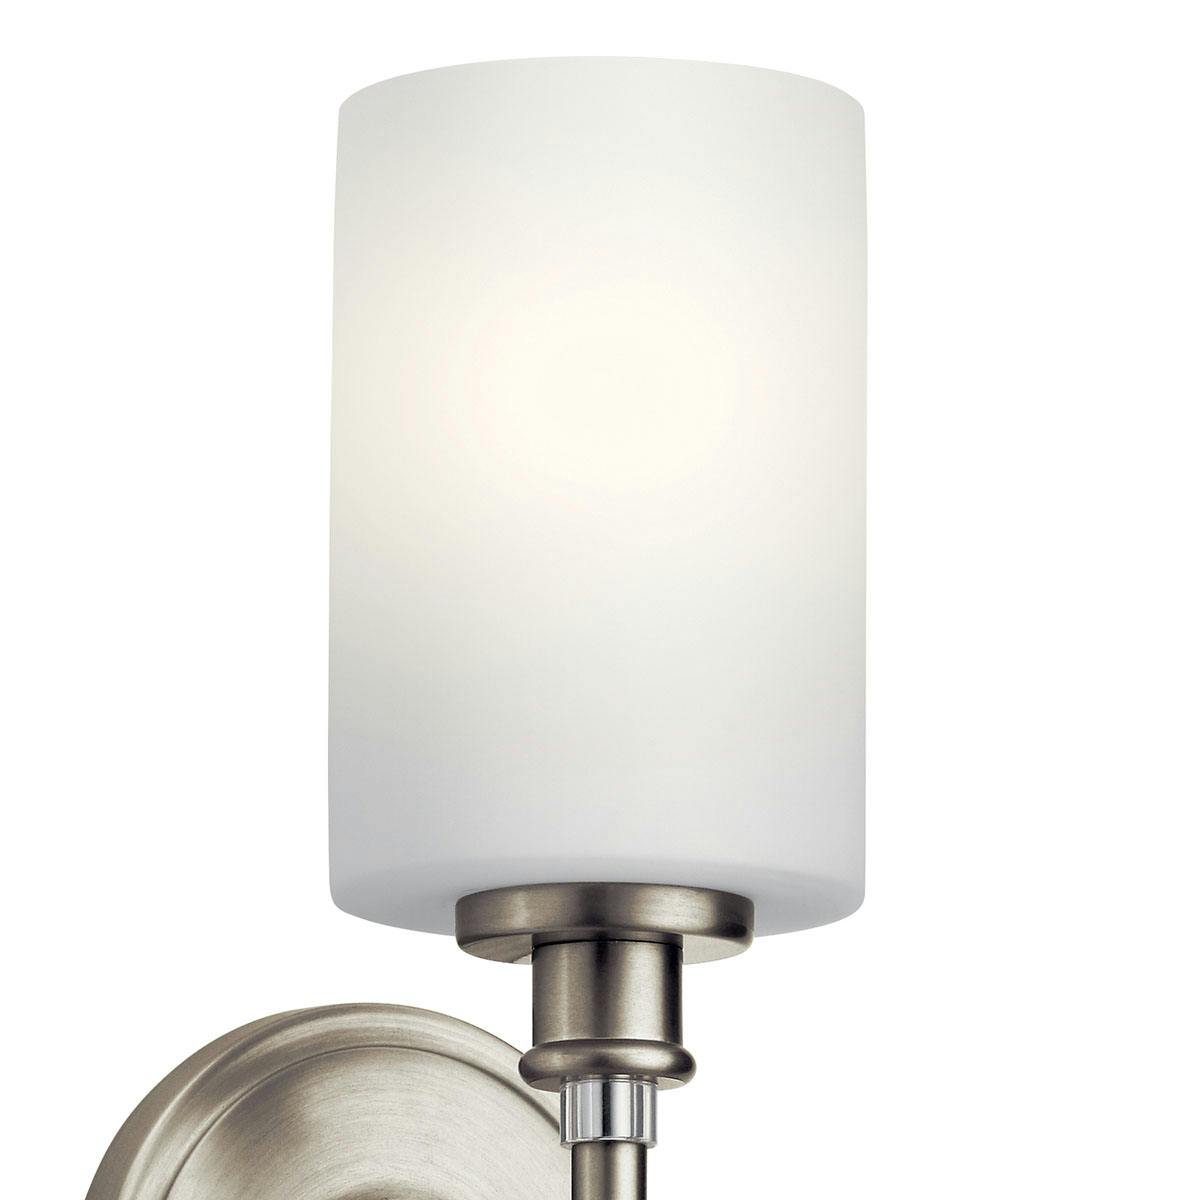 Close up view of the Joelson 1 Light Sconce Brushed Nickel on a white background